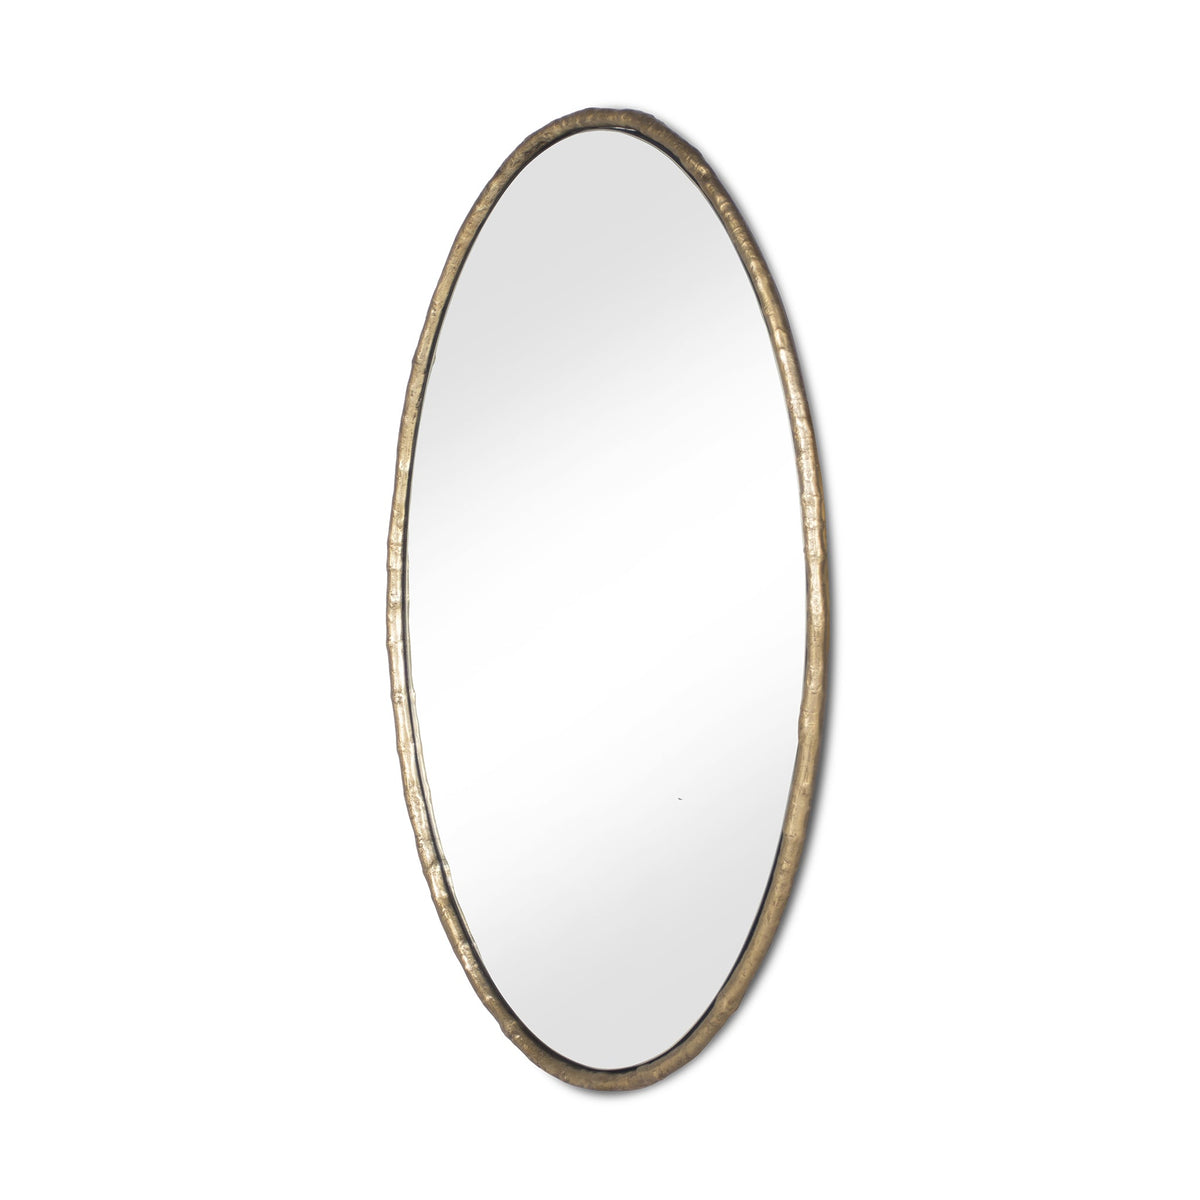 CAYMAN BRUSHED BRASS OVAL MIRROR